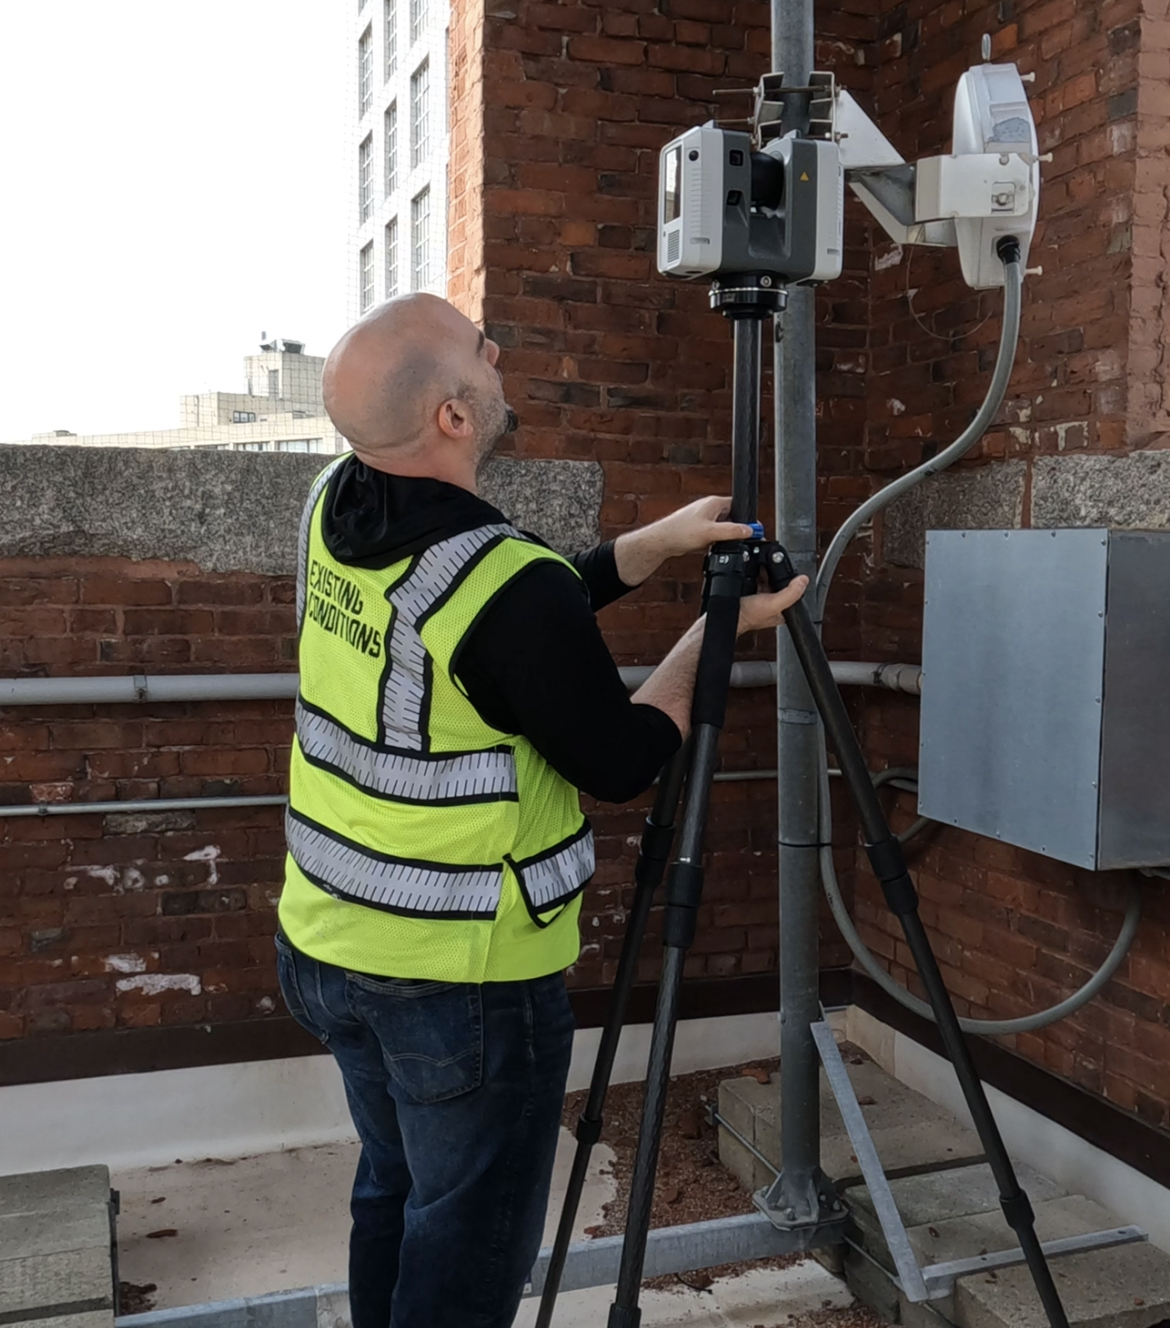 Mike Remond, Senior Operations Associate, utilizing the Leica RTC360 scanner on-site at St. Cecilia Parish